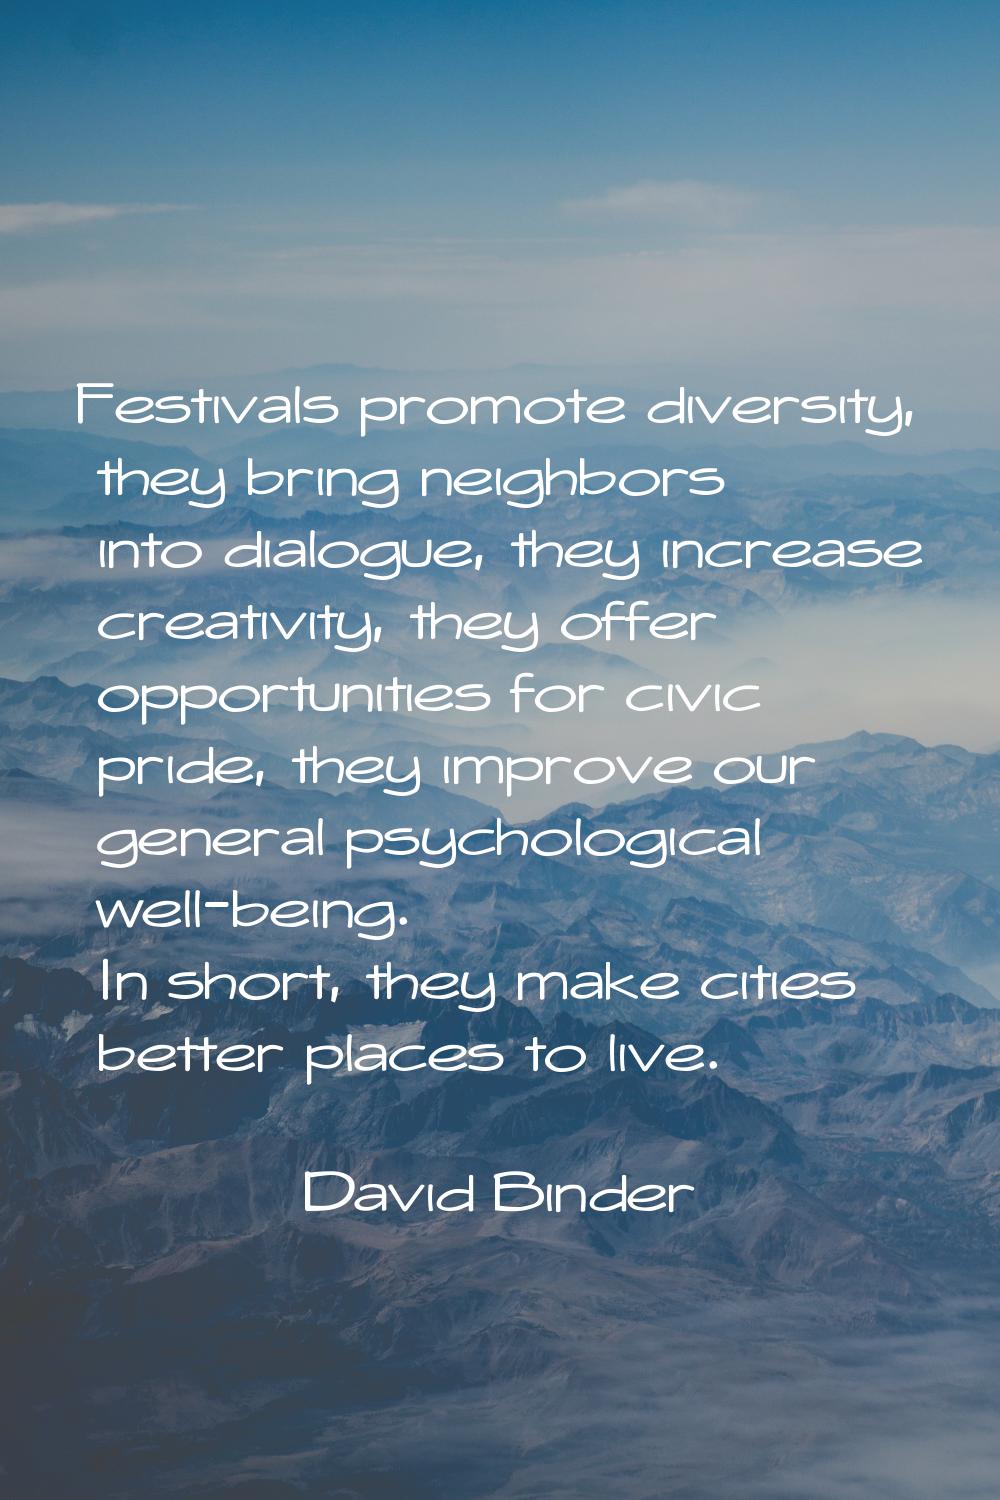 Festivals promote diversity, they bring neighbors into dialogue, they increase creativity, they off